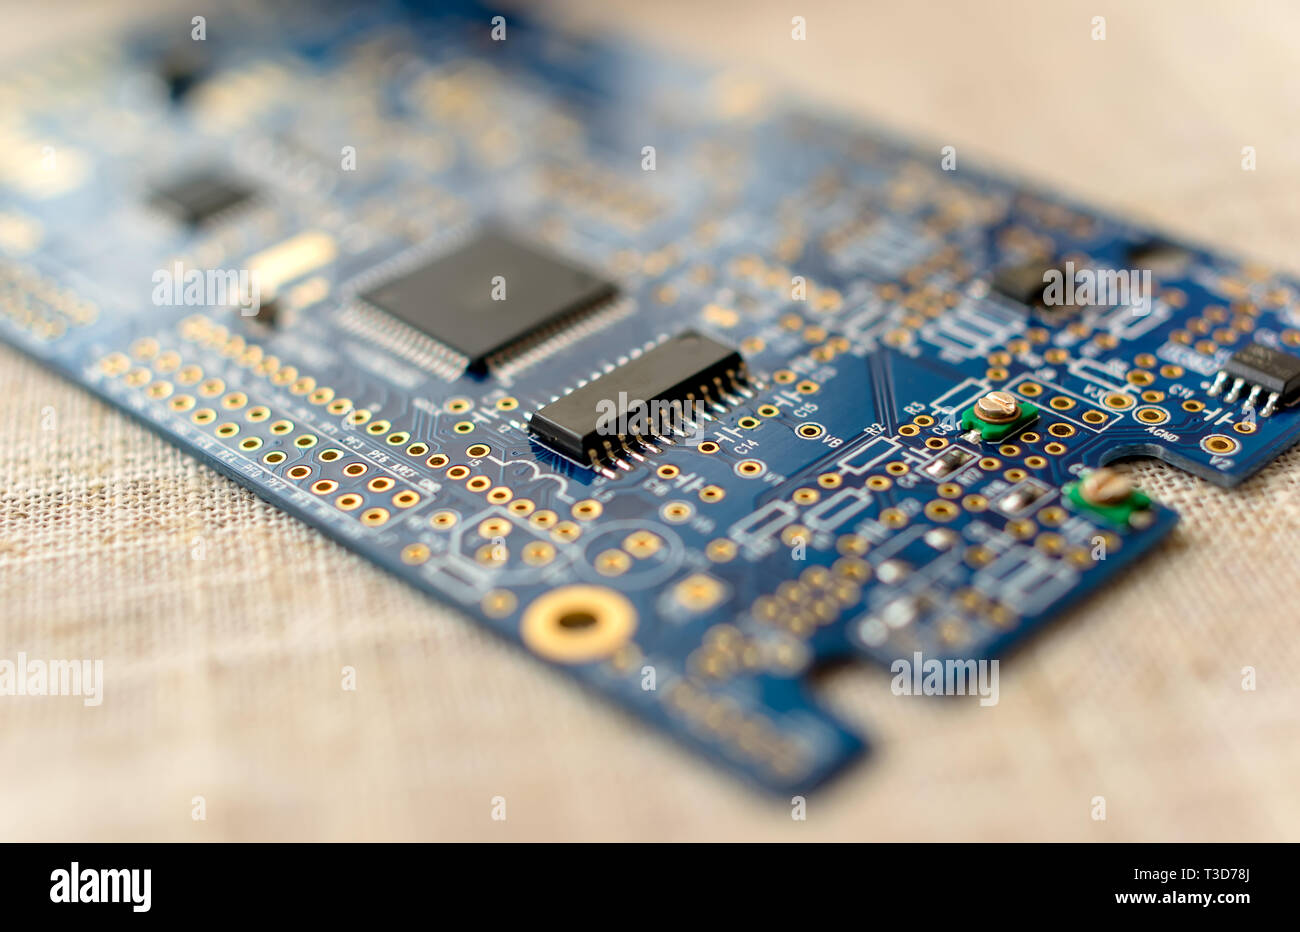 Circuitboard with resistors microchips and smd electronic components - selective focus Stock Photo